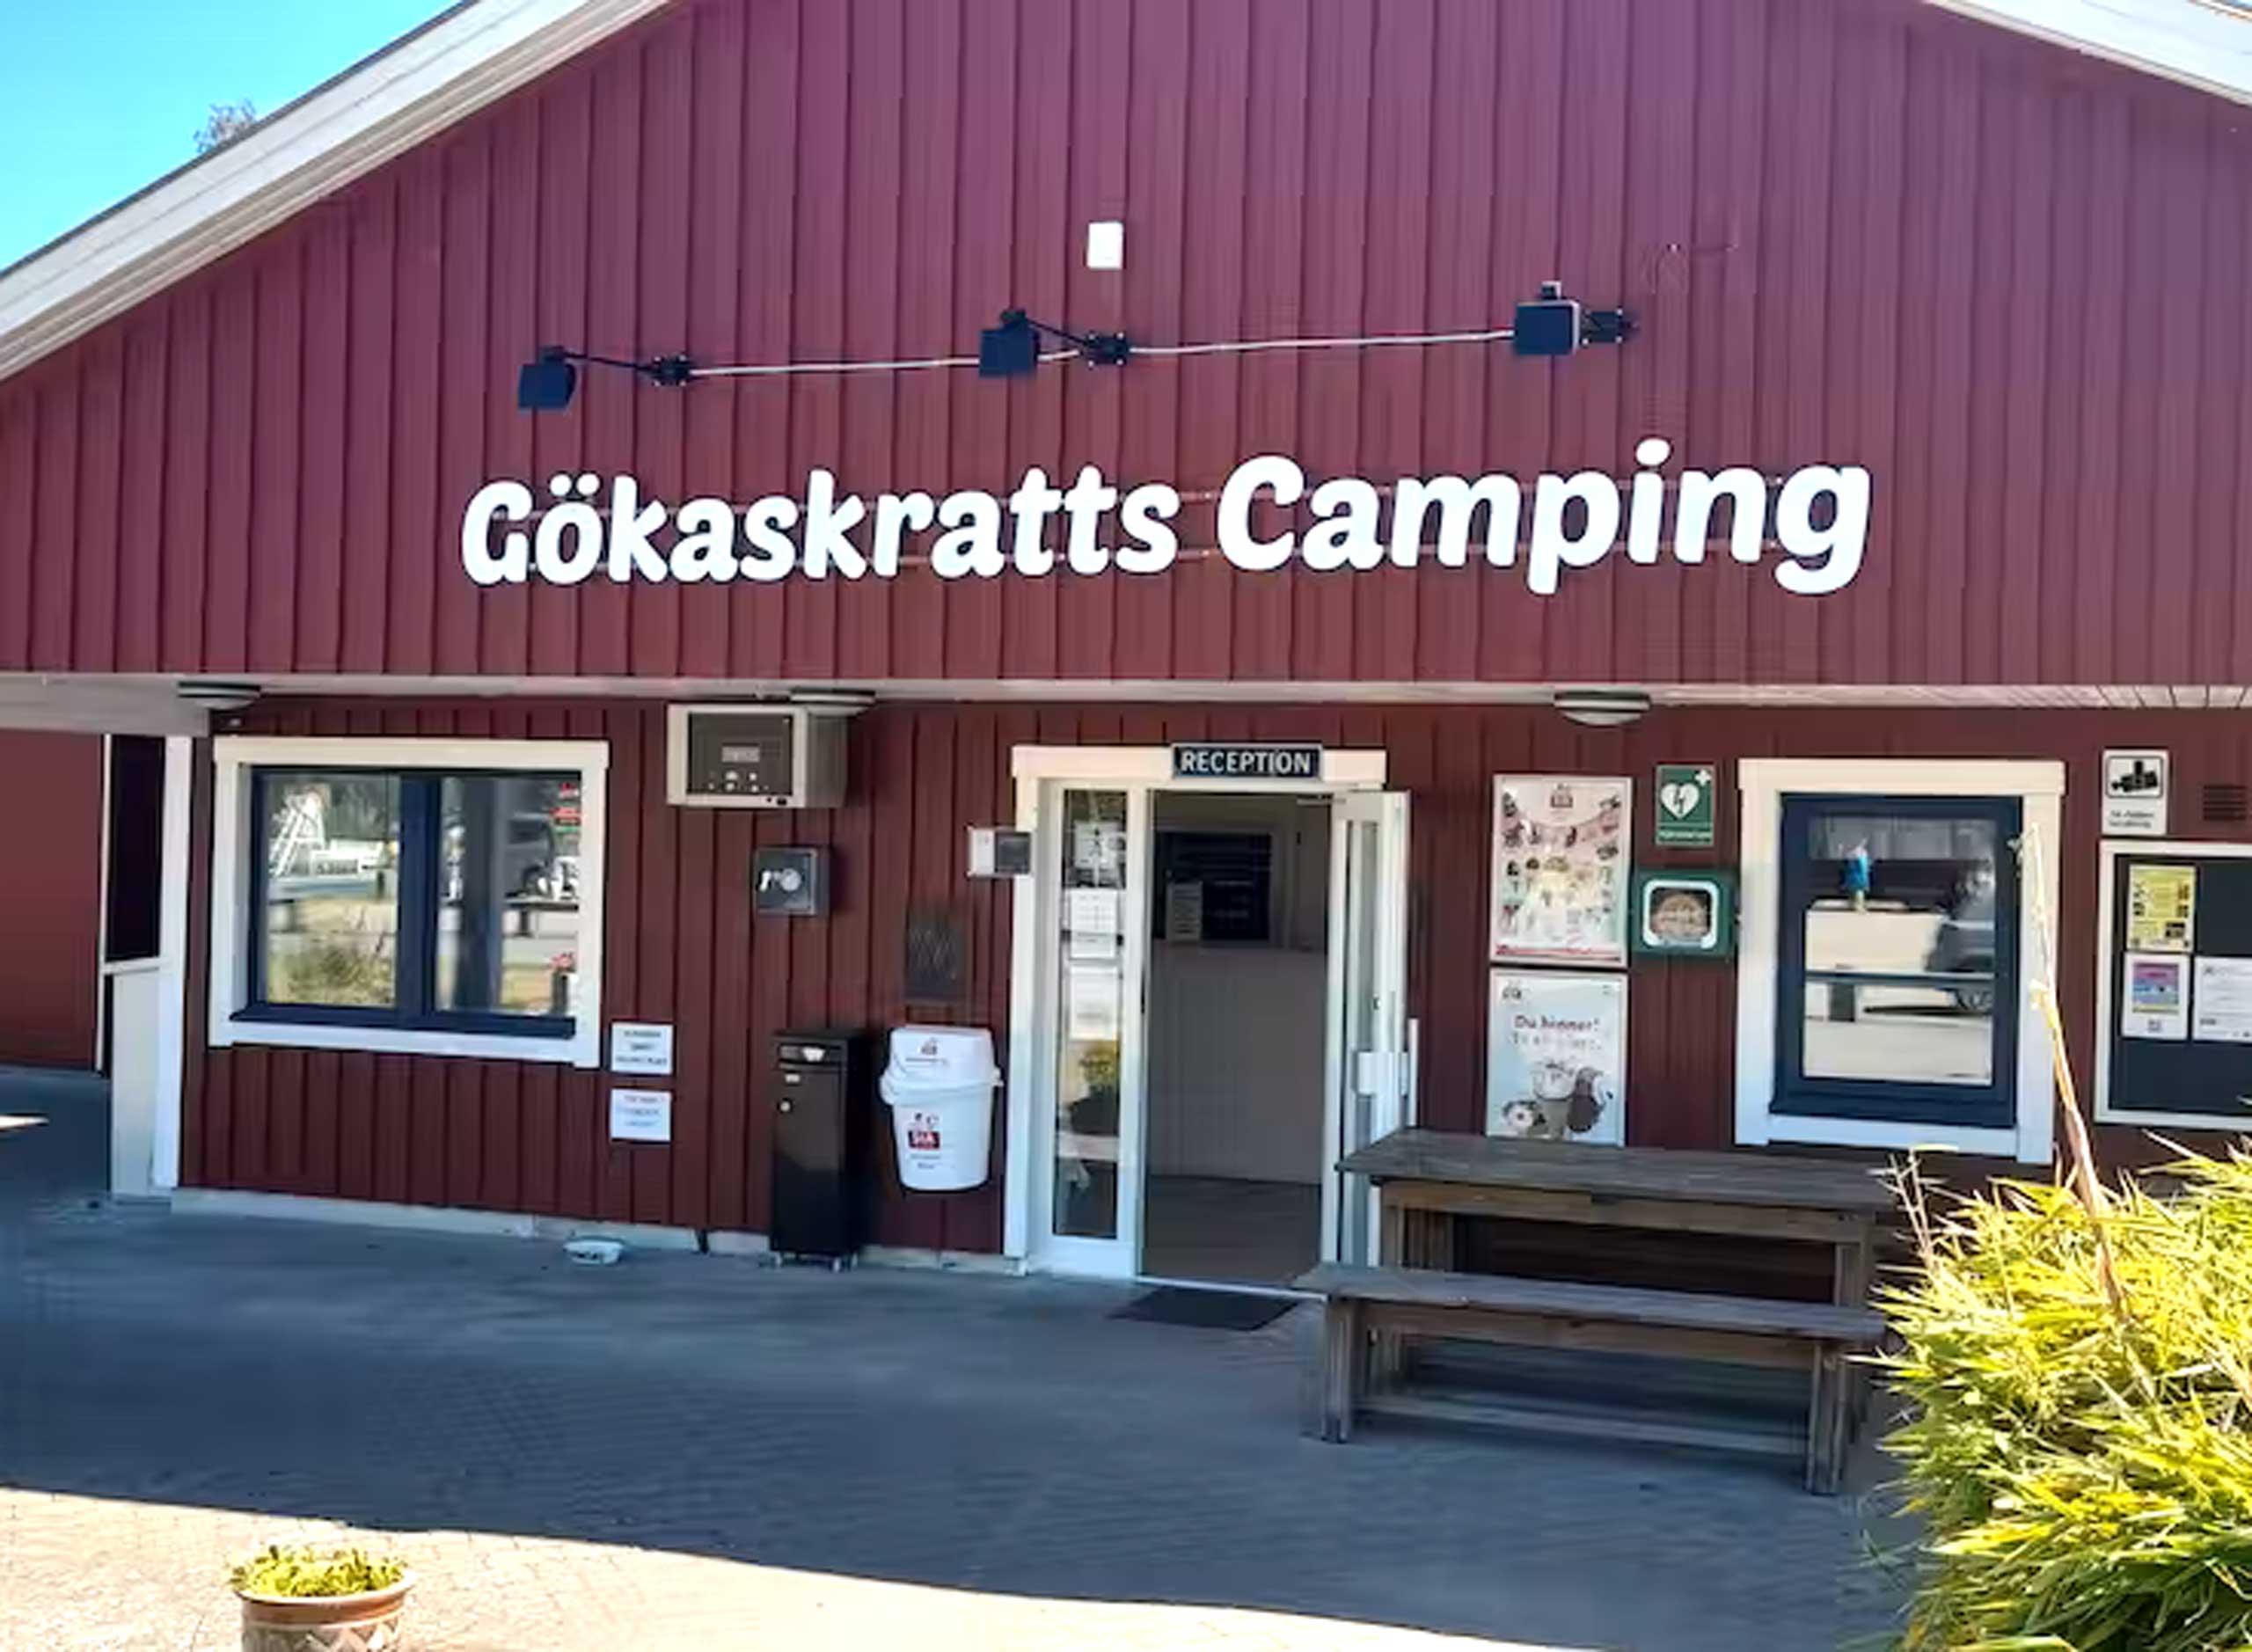 Gökaskratts Camping is located in the middle of Småland’s Glasriket. Copyright: Pincamp.de